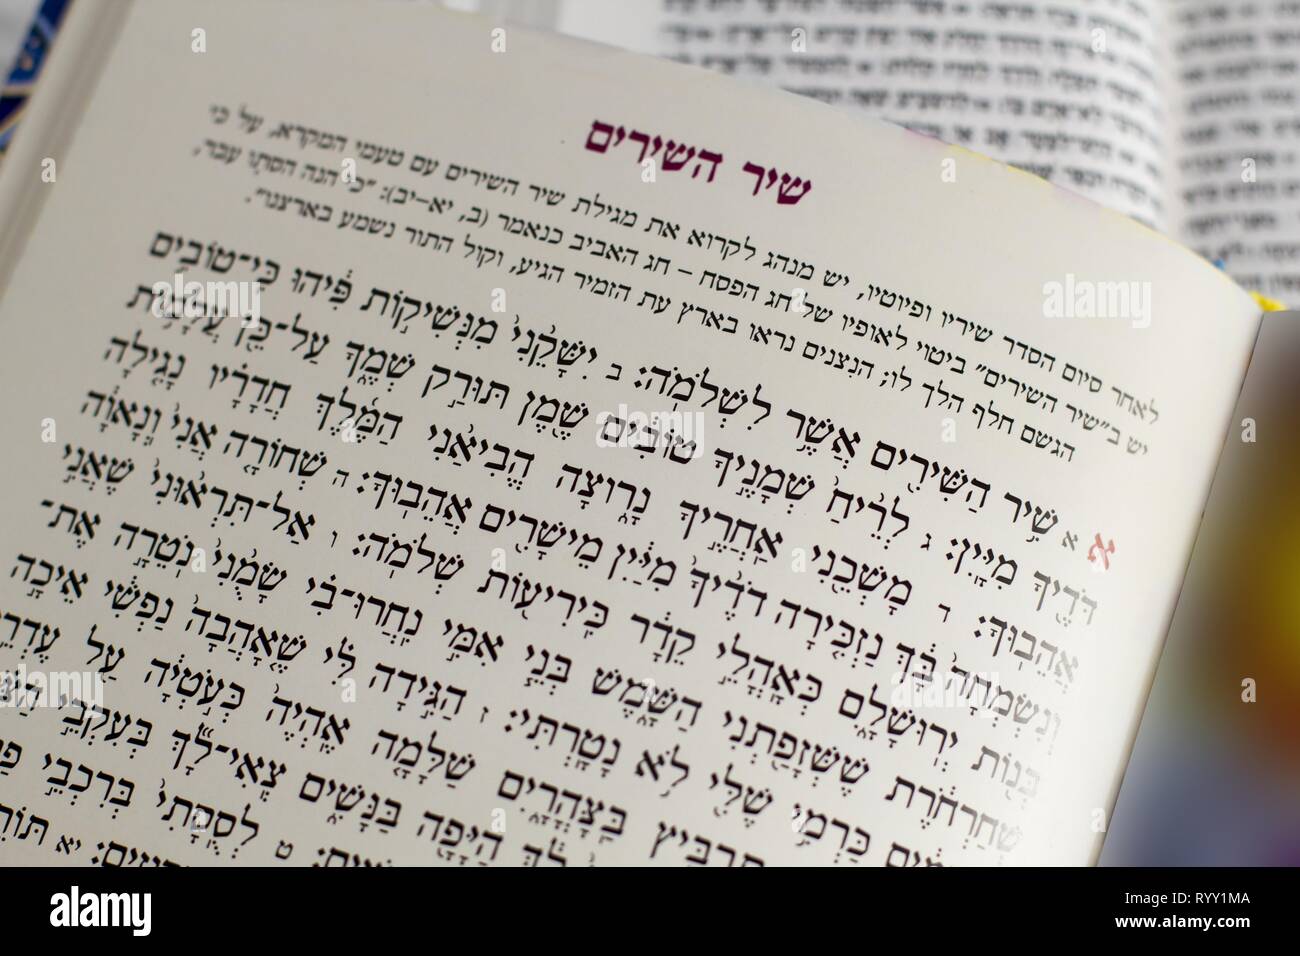 Fragment of Song of Songs Hebrew Book. This book is the festal scroll for Pesaḥ (Passover), which celebrates the Exodus of the Israelites from Egypt. Stock Photo